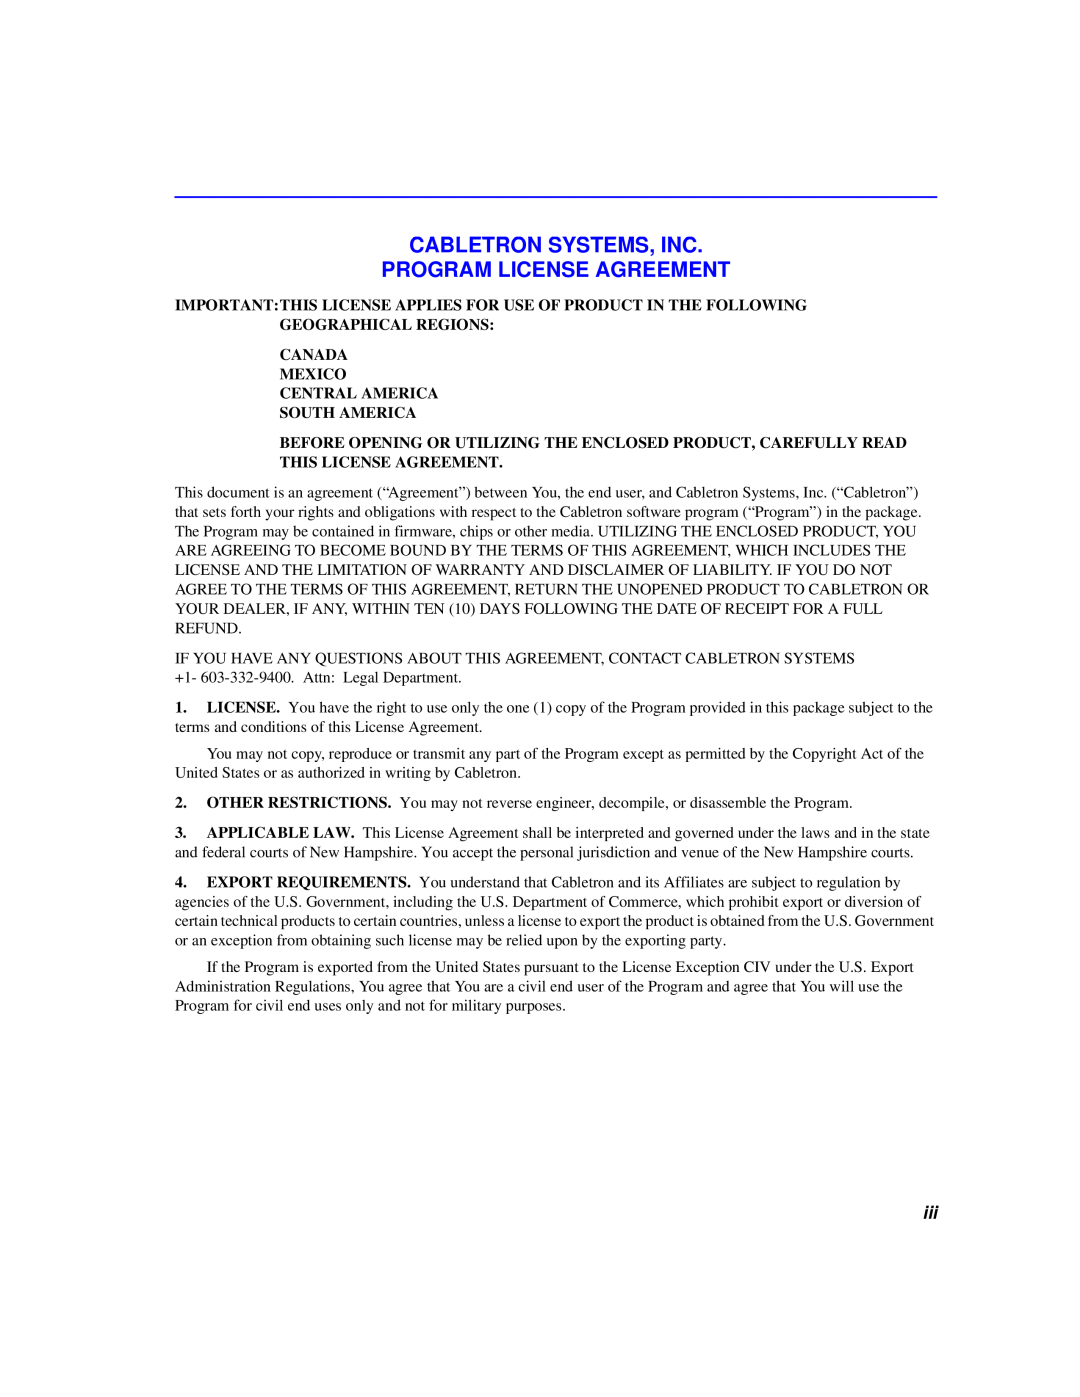 Cabletron Systems 6000 manual Cabletron Systems, Inc Program License Agreement 